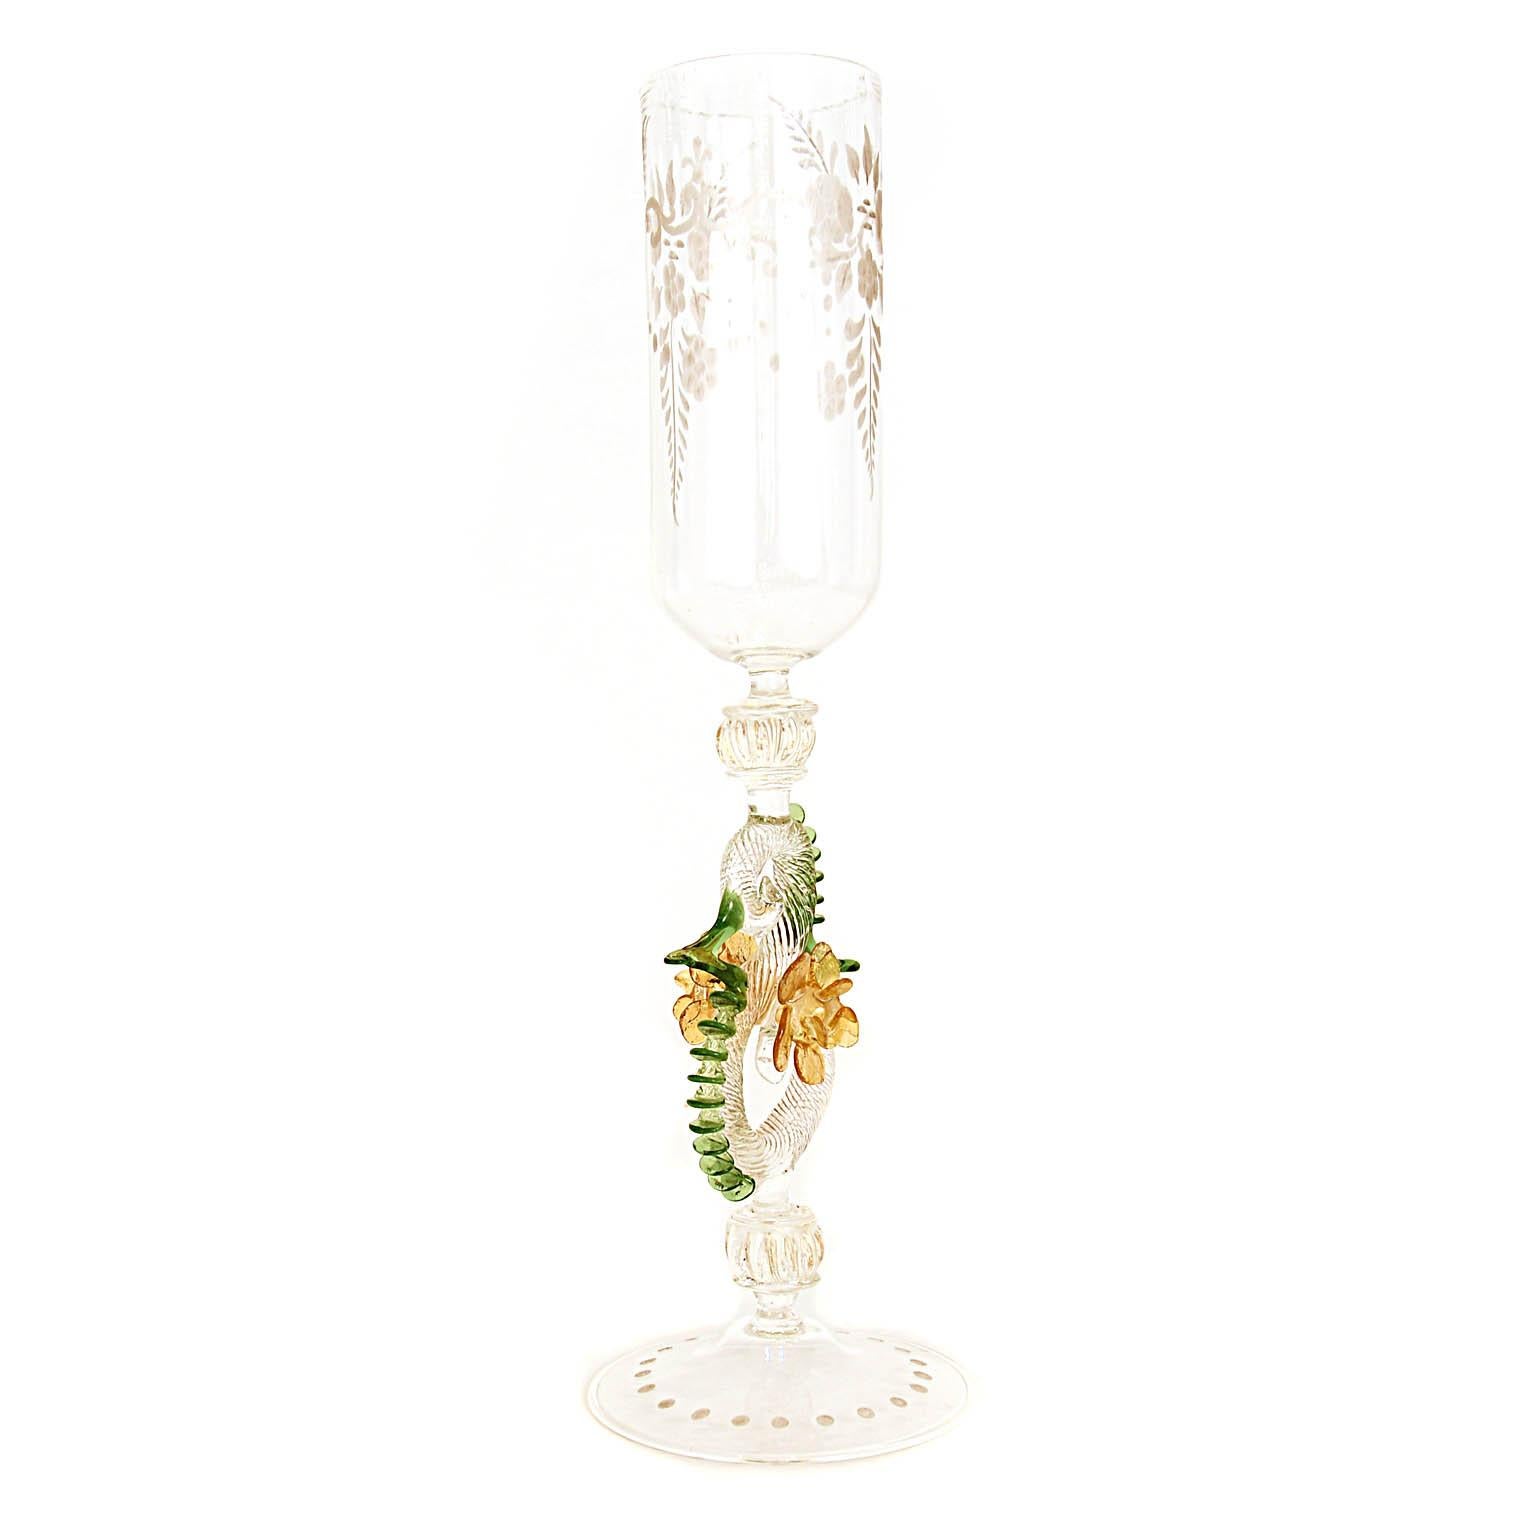 Italian handcrafted chalice in clear, amber and green glass.
The base is decorated with cutted dots, the chalice with cutted flowers The stem is adorned with different Morise decorations, has green blossoms on each side.
The glass has tiny